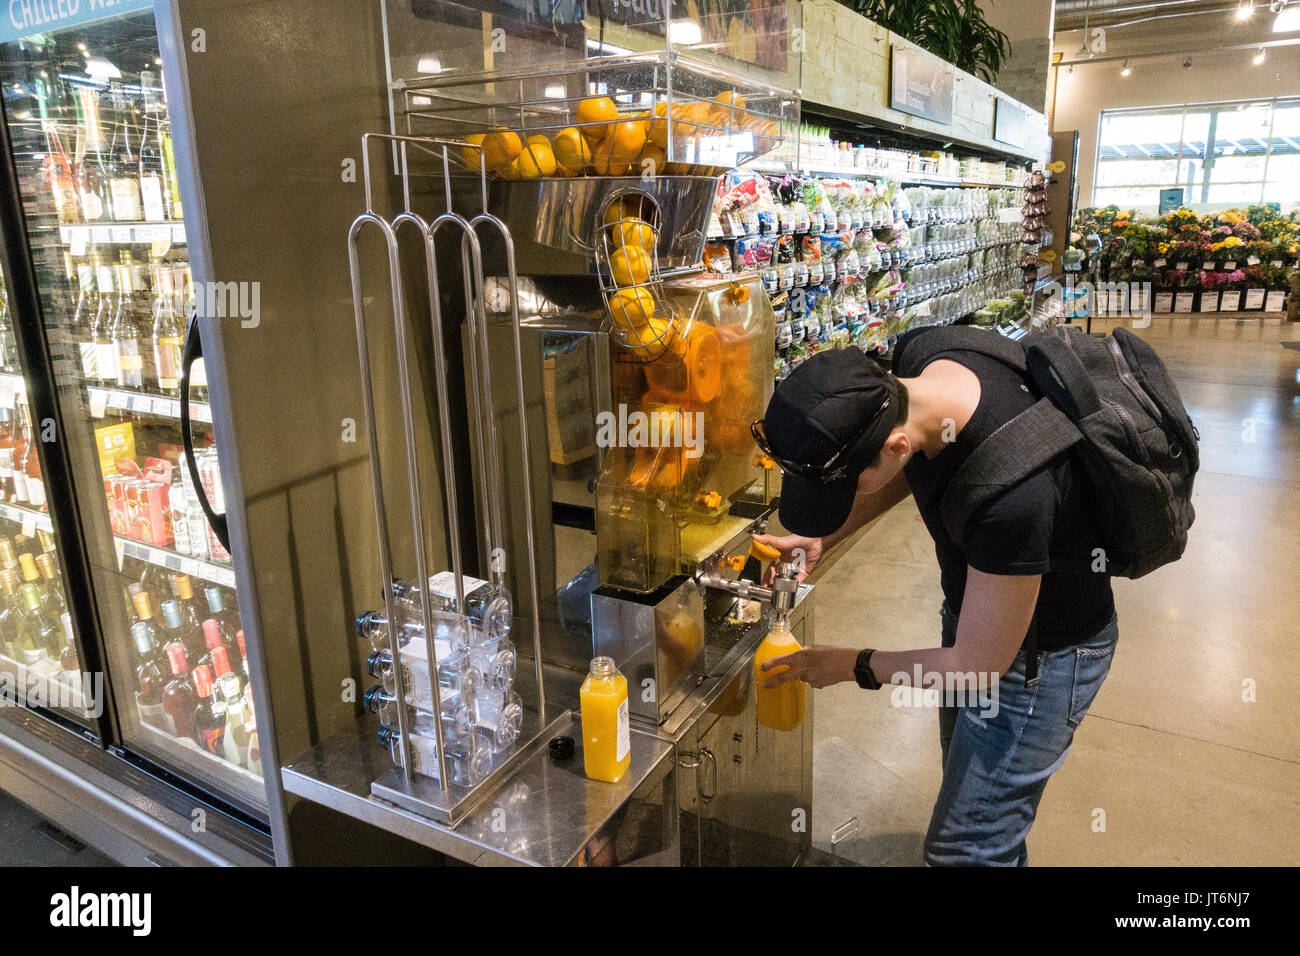 Young woman operating a self served orange juicer - fresh squeezed orange juice at the Whole Food Market store Stock Photo